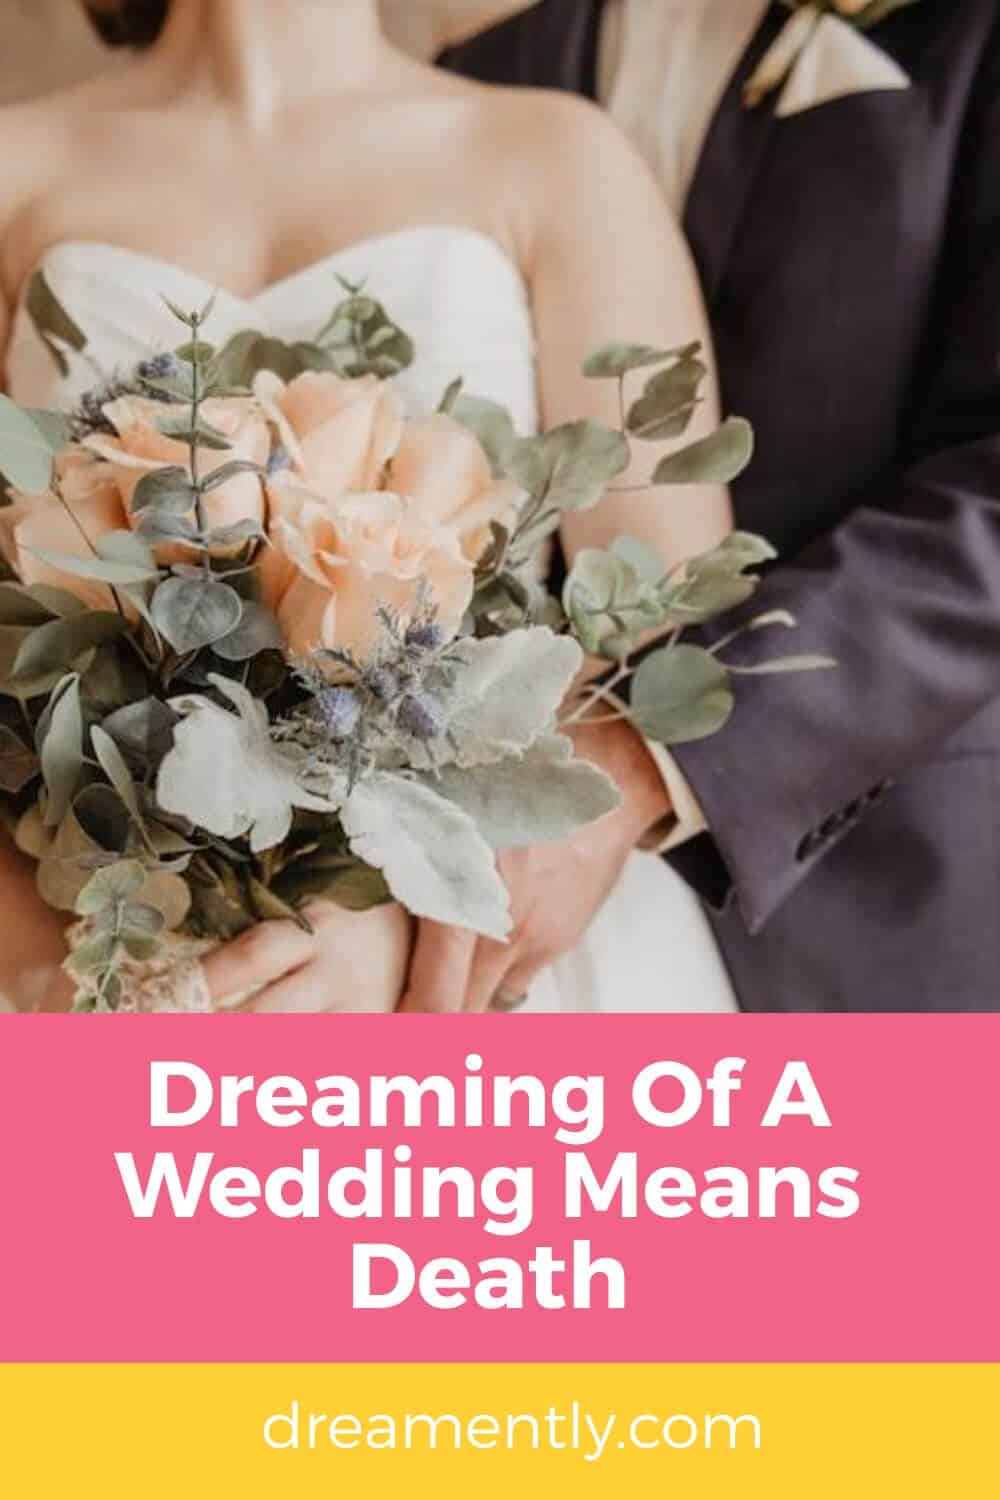 Dreaming Of A Wedding Means Death